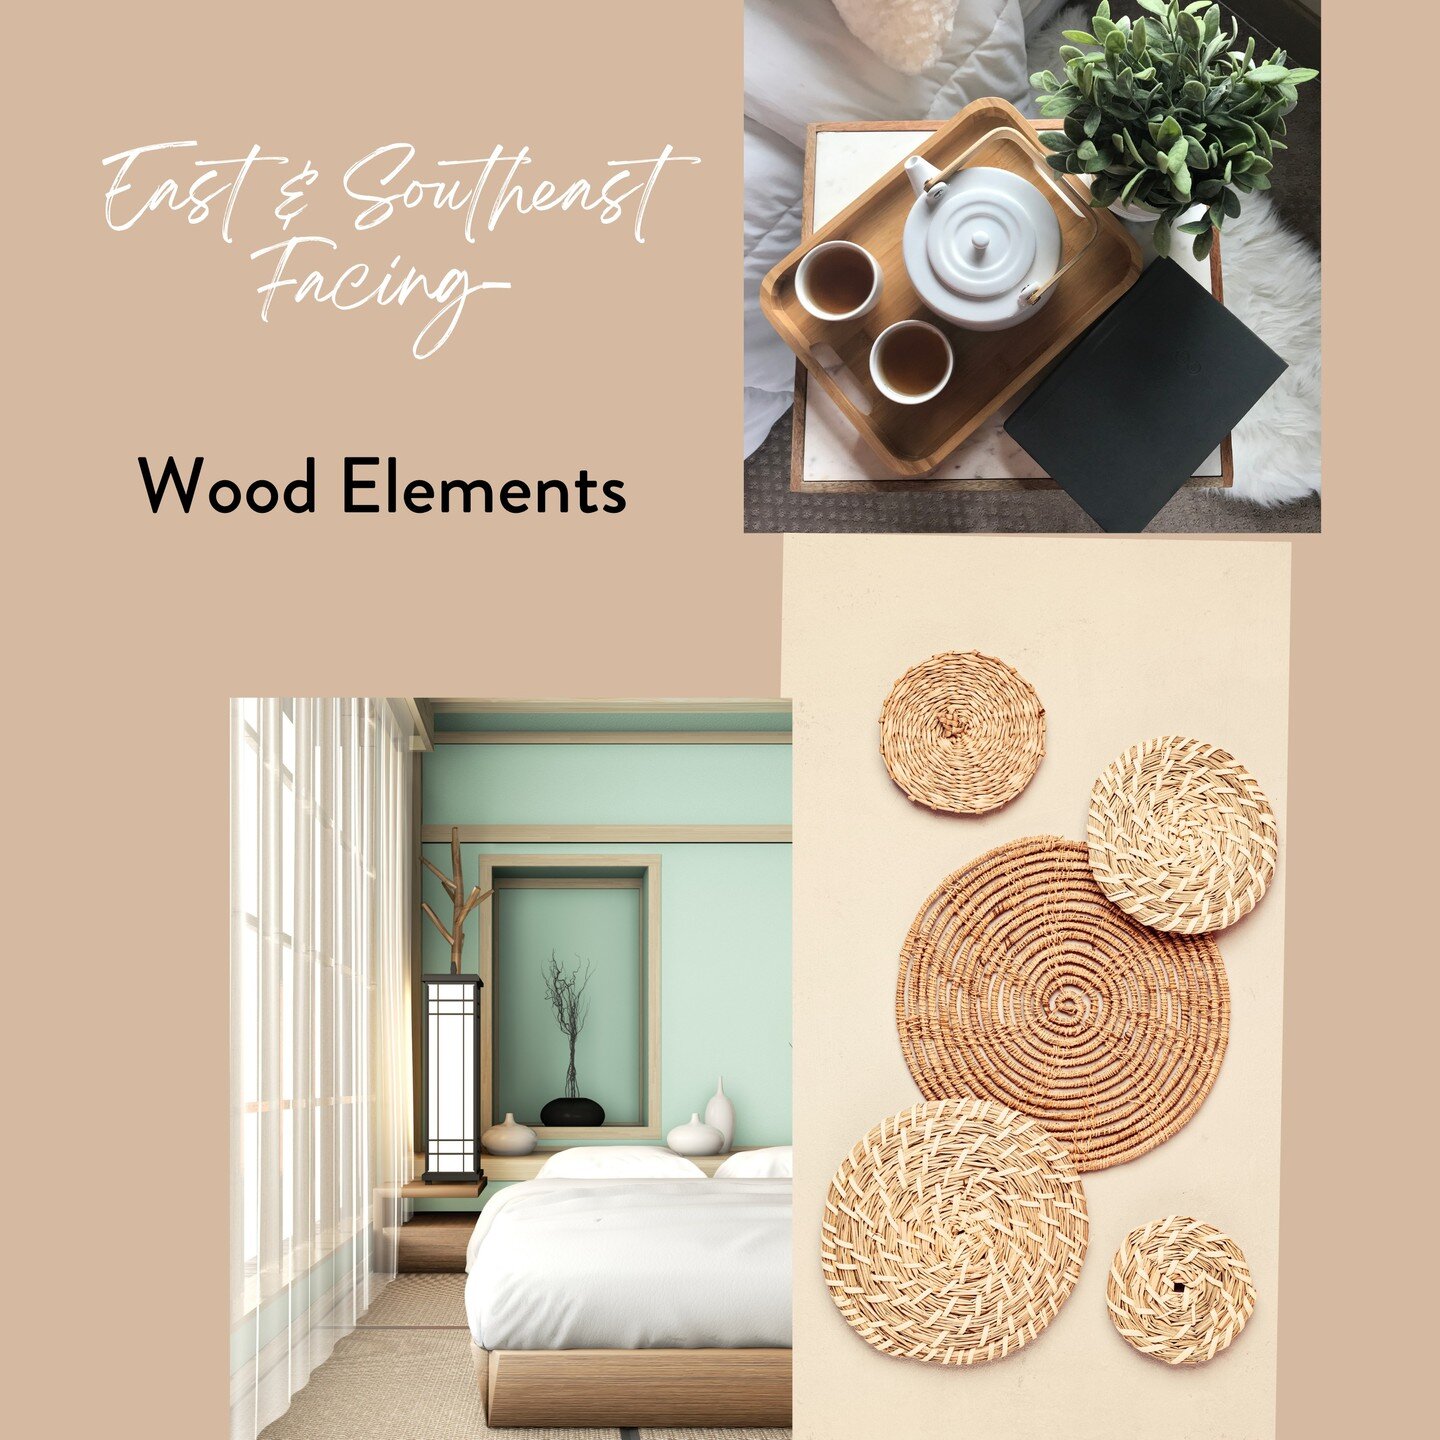 Cozy Wood Elements in Feng Shui are easy to add to any room in the home. We've got some great home decor ideas just for you!

Link: https://www.mimichouse.com/